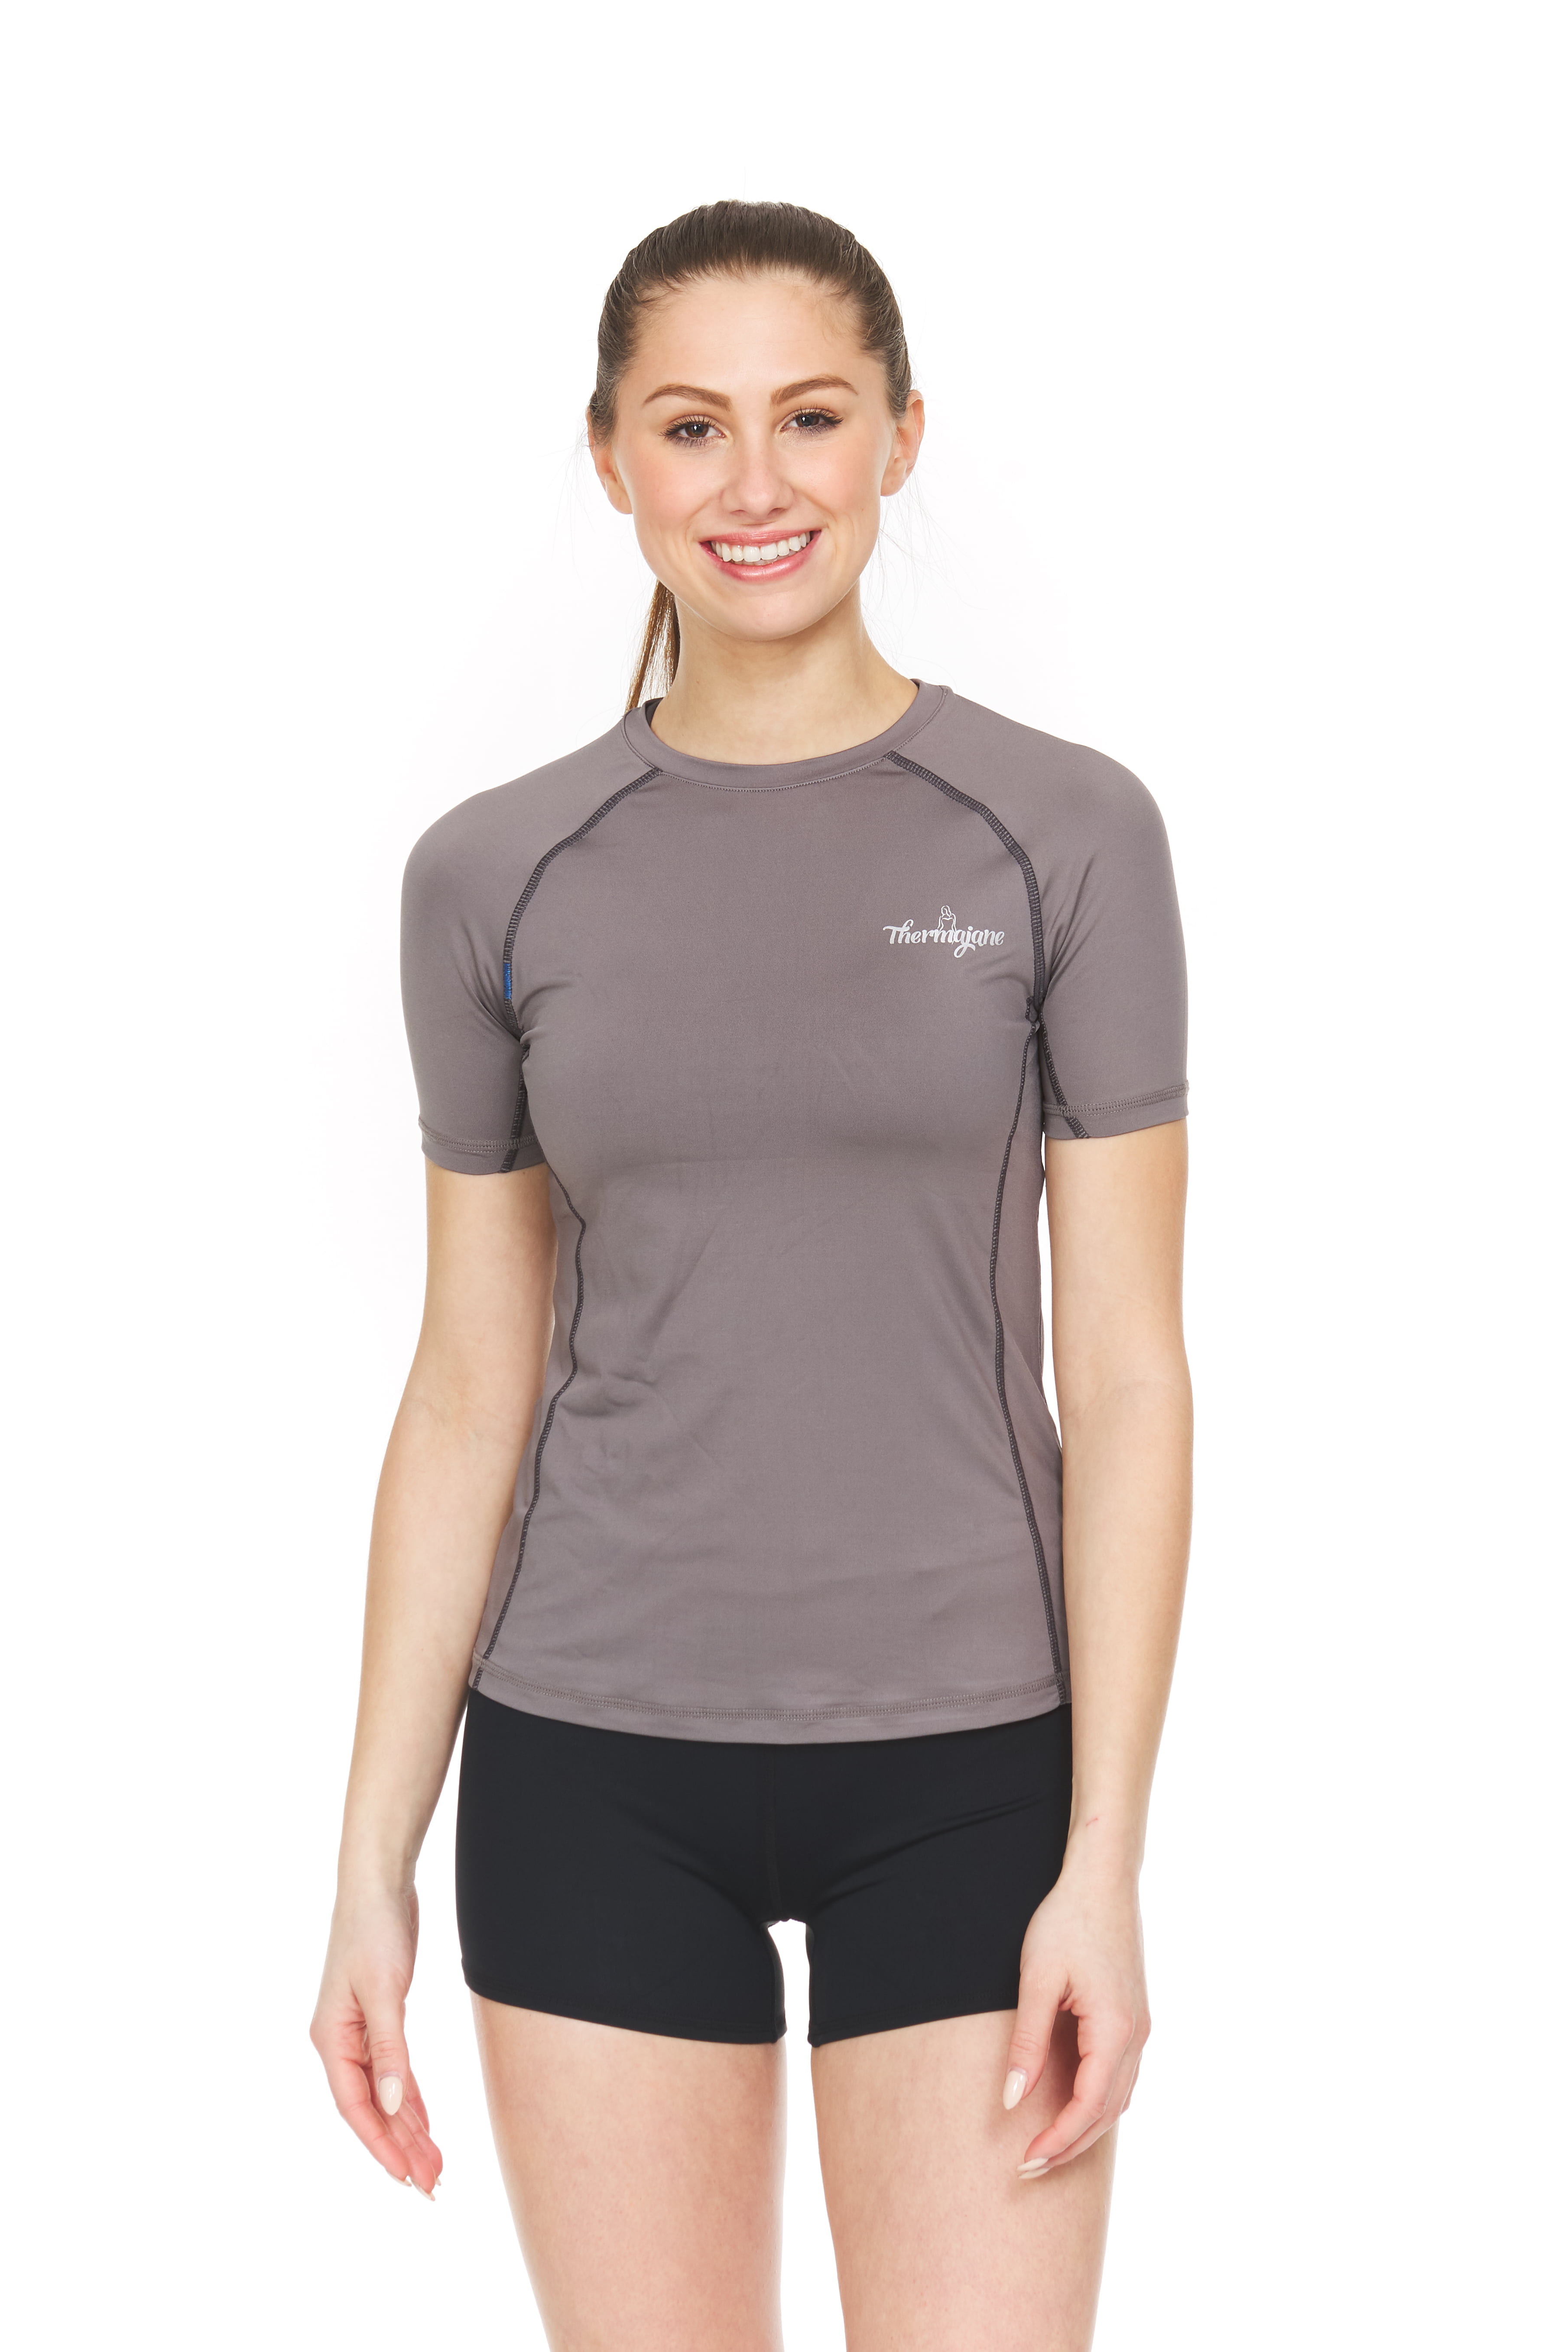 cooling athletic shirts